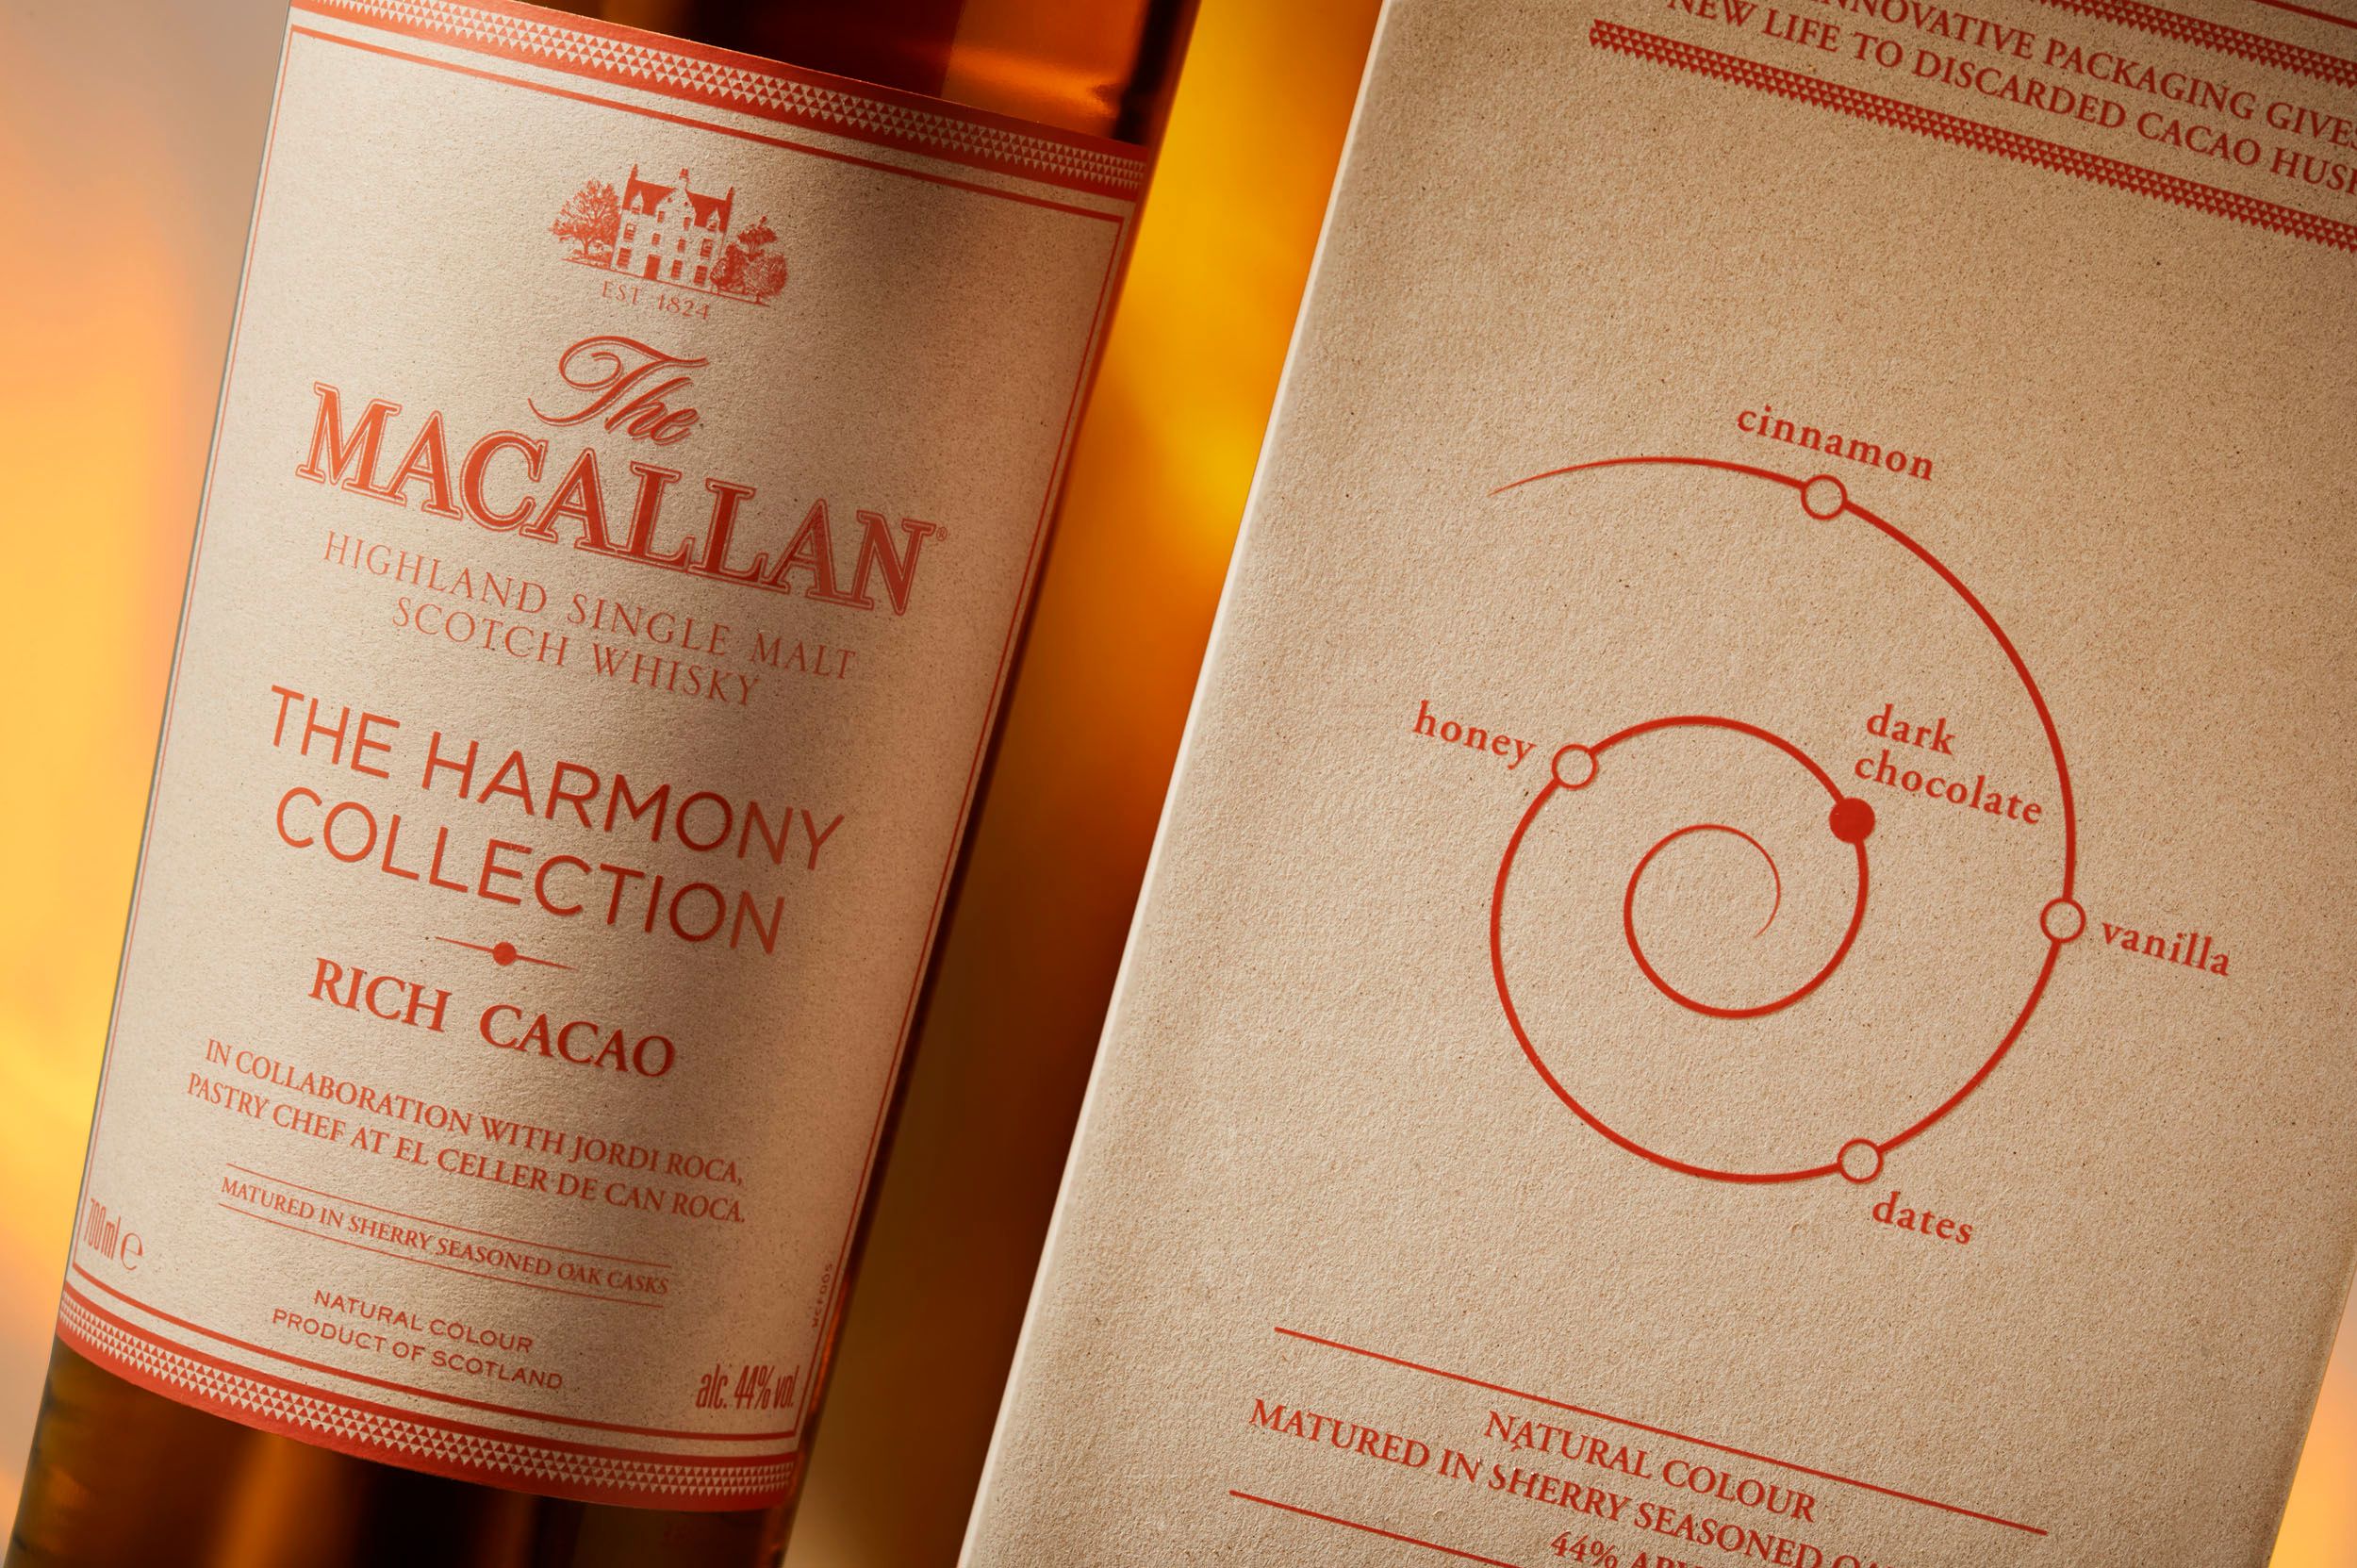 The Macallan&#8217;s New Harmony Collection Is An After-Hours Must Have